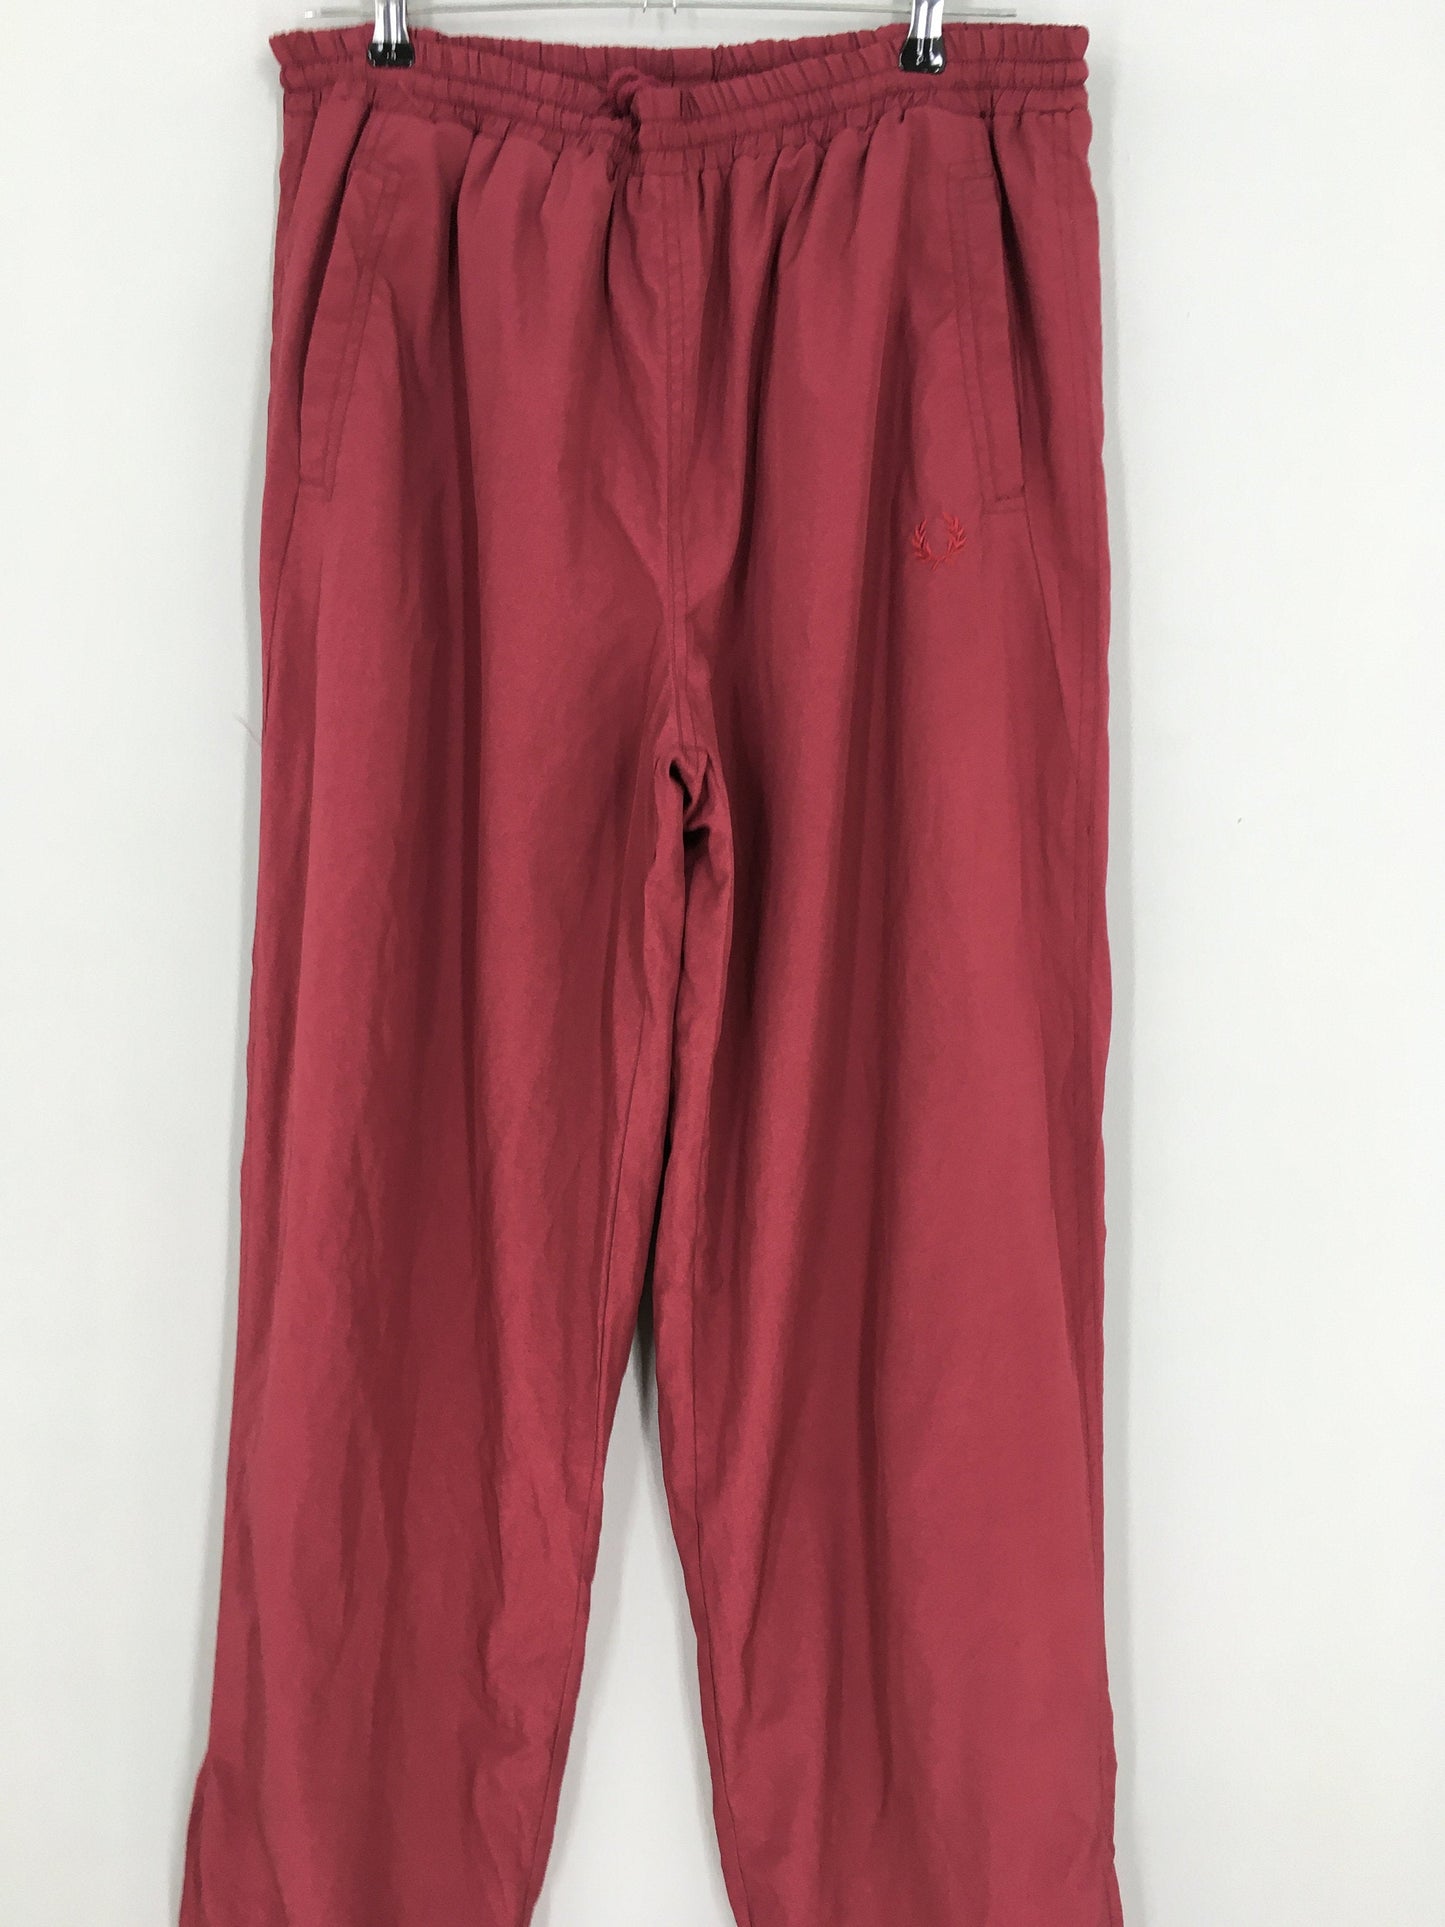 Fred Perry Red Track Pants Size 32-36